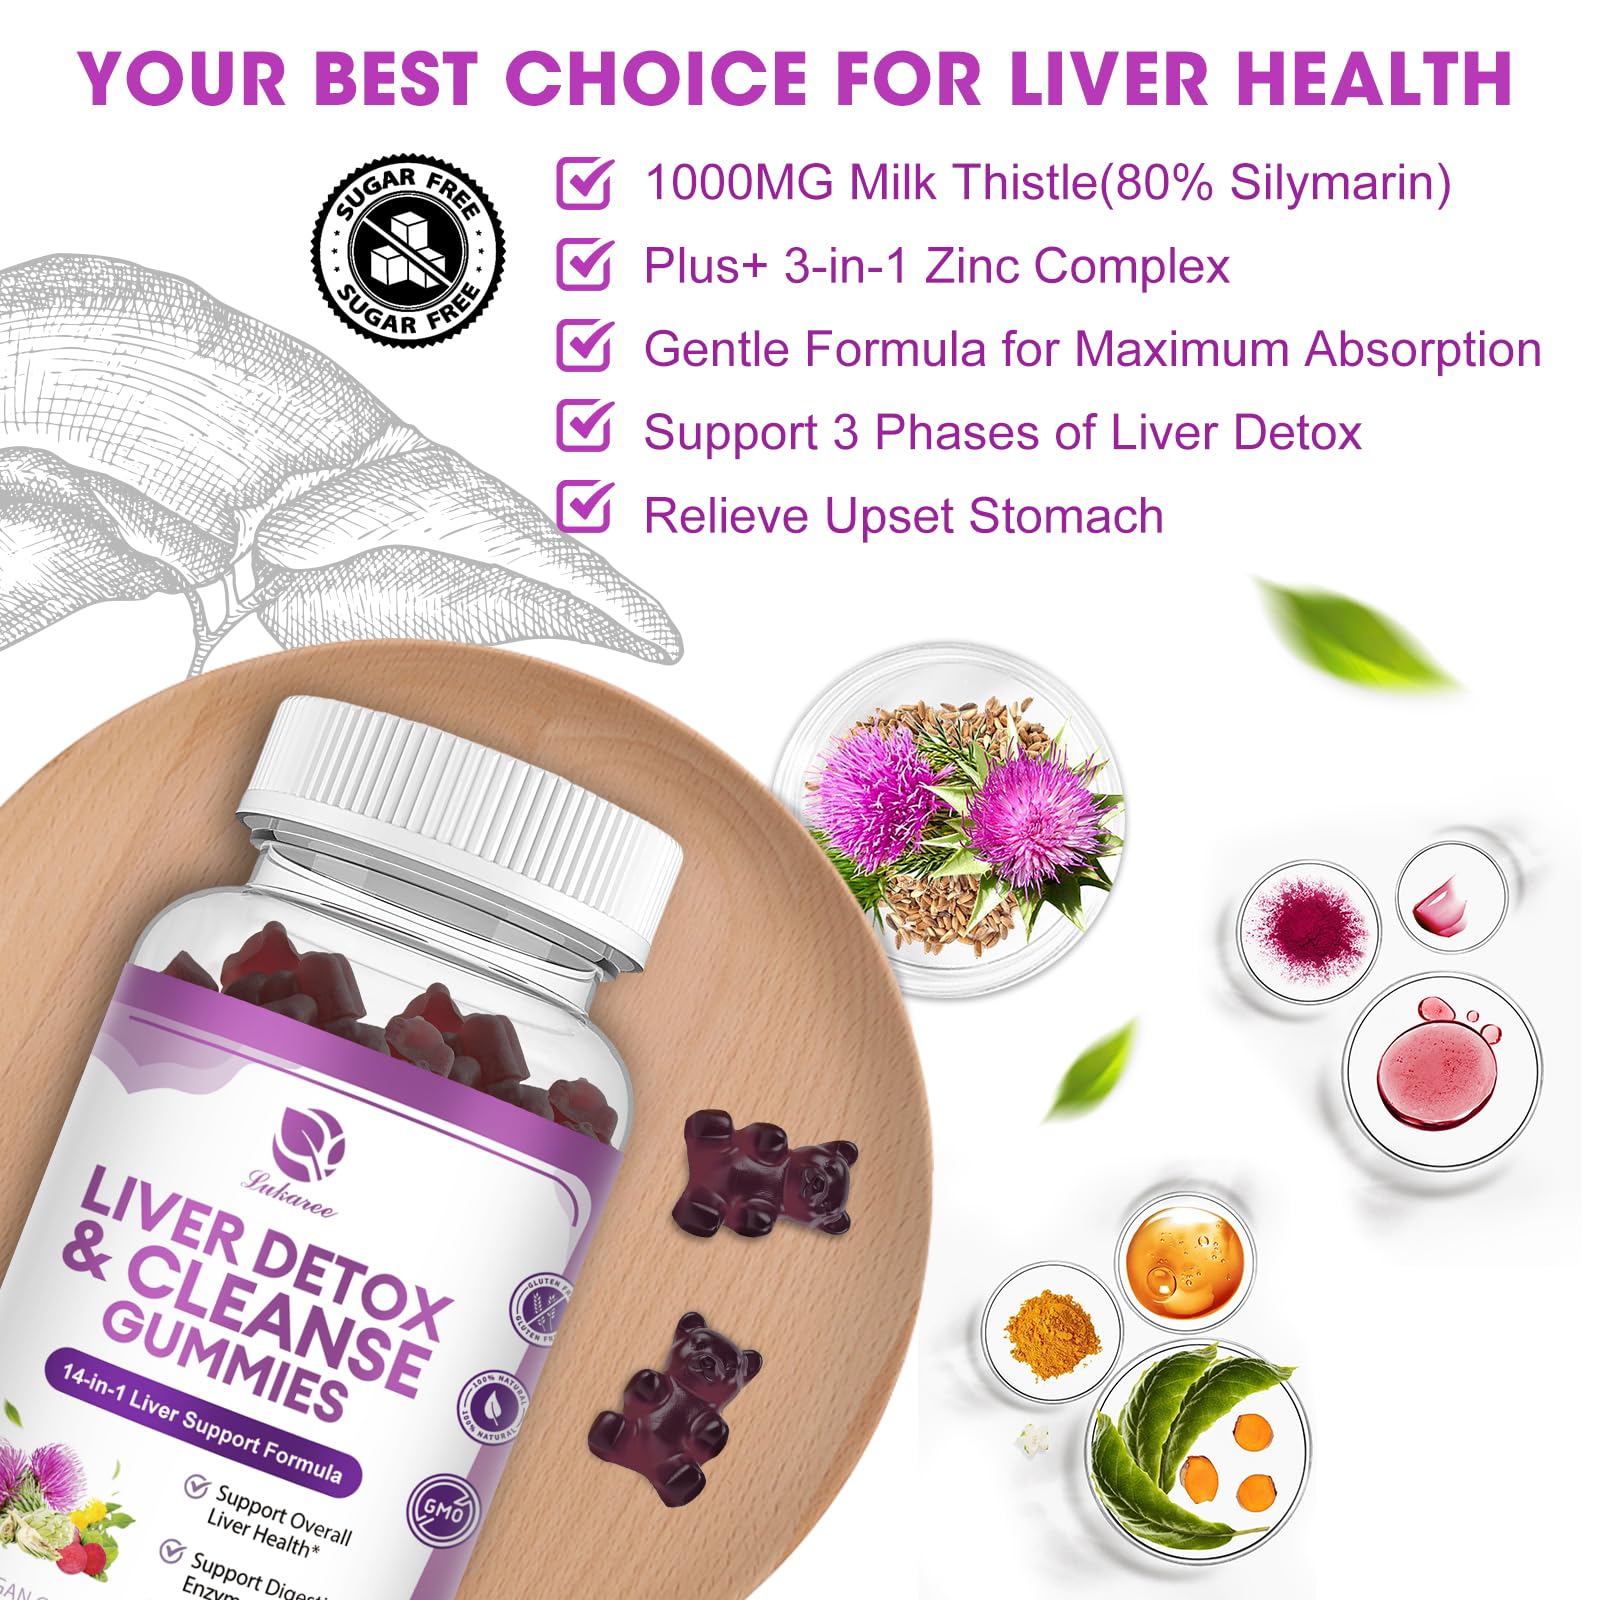 Extra Strength Liver Cleanse Gummies: 14-in-1 Support - 120 Ct